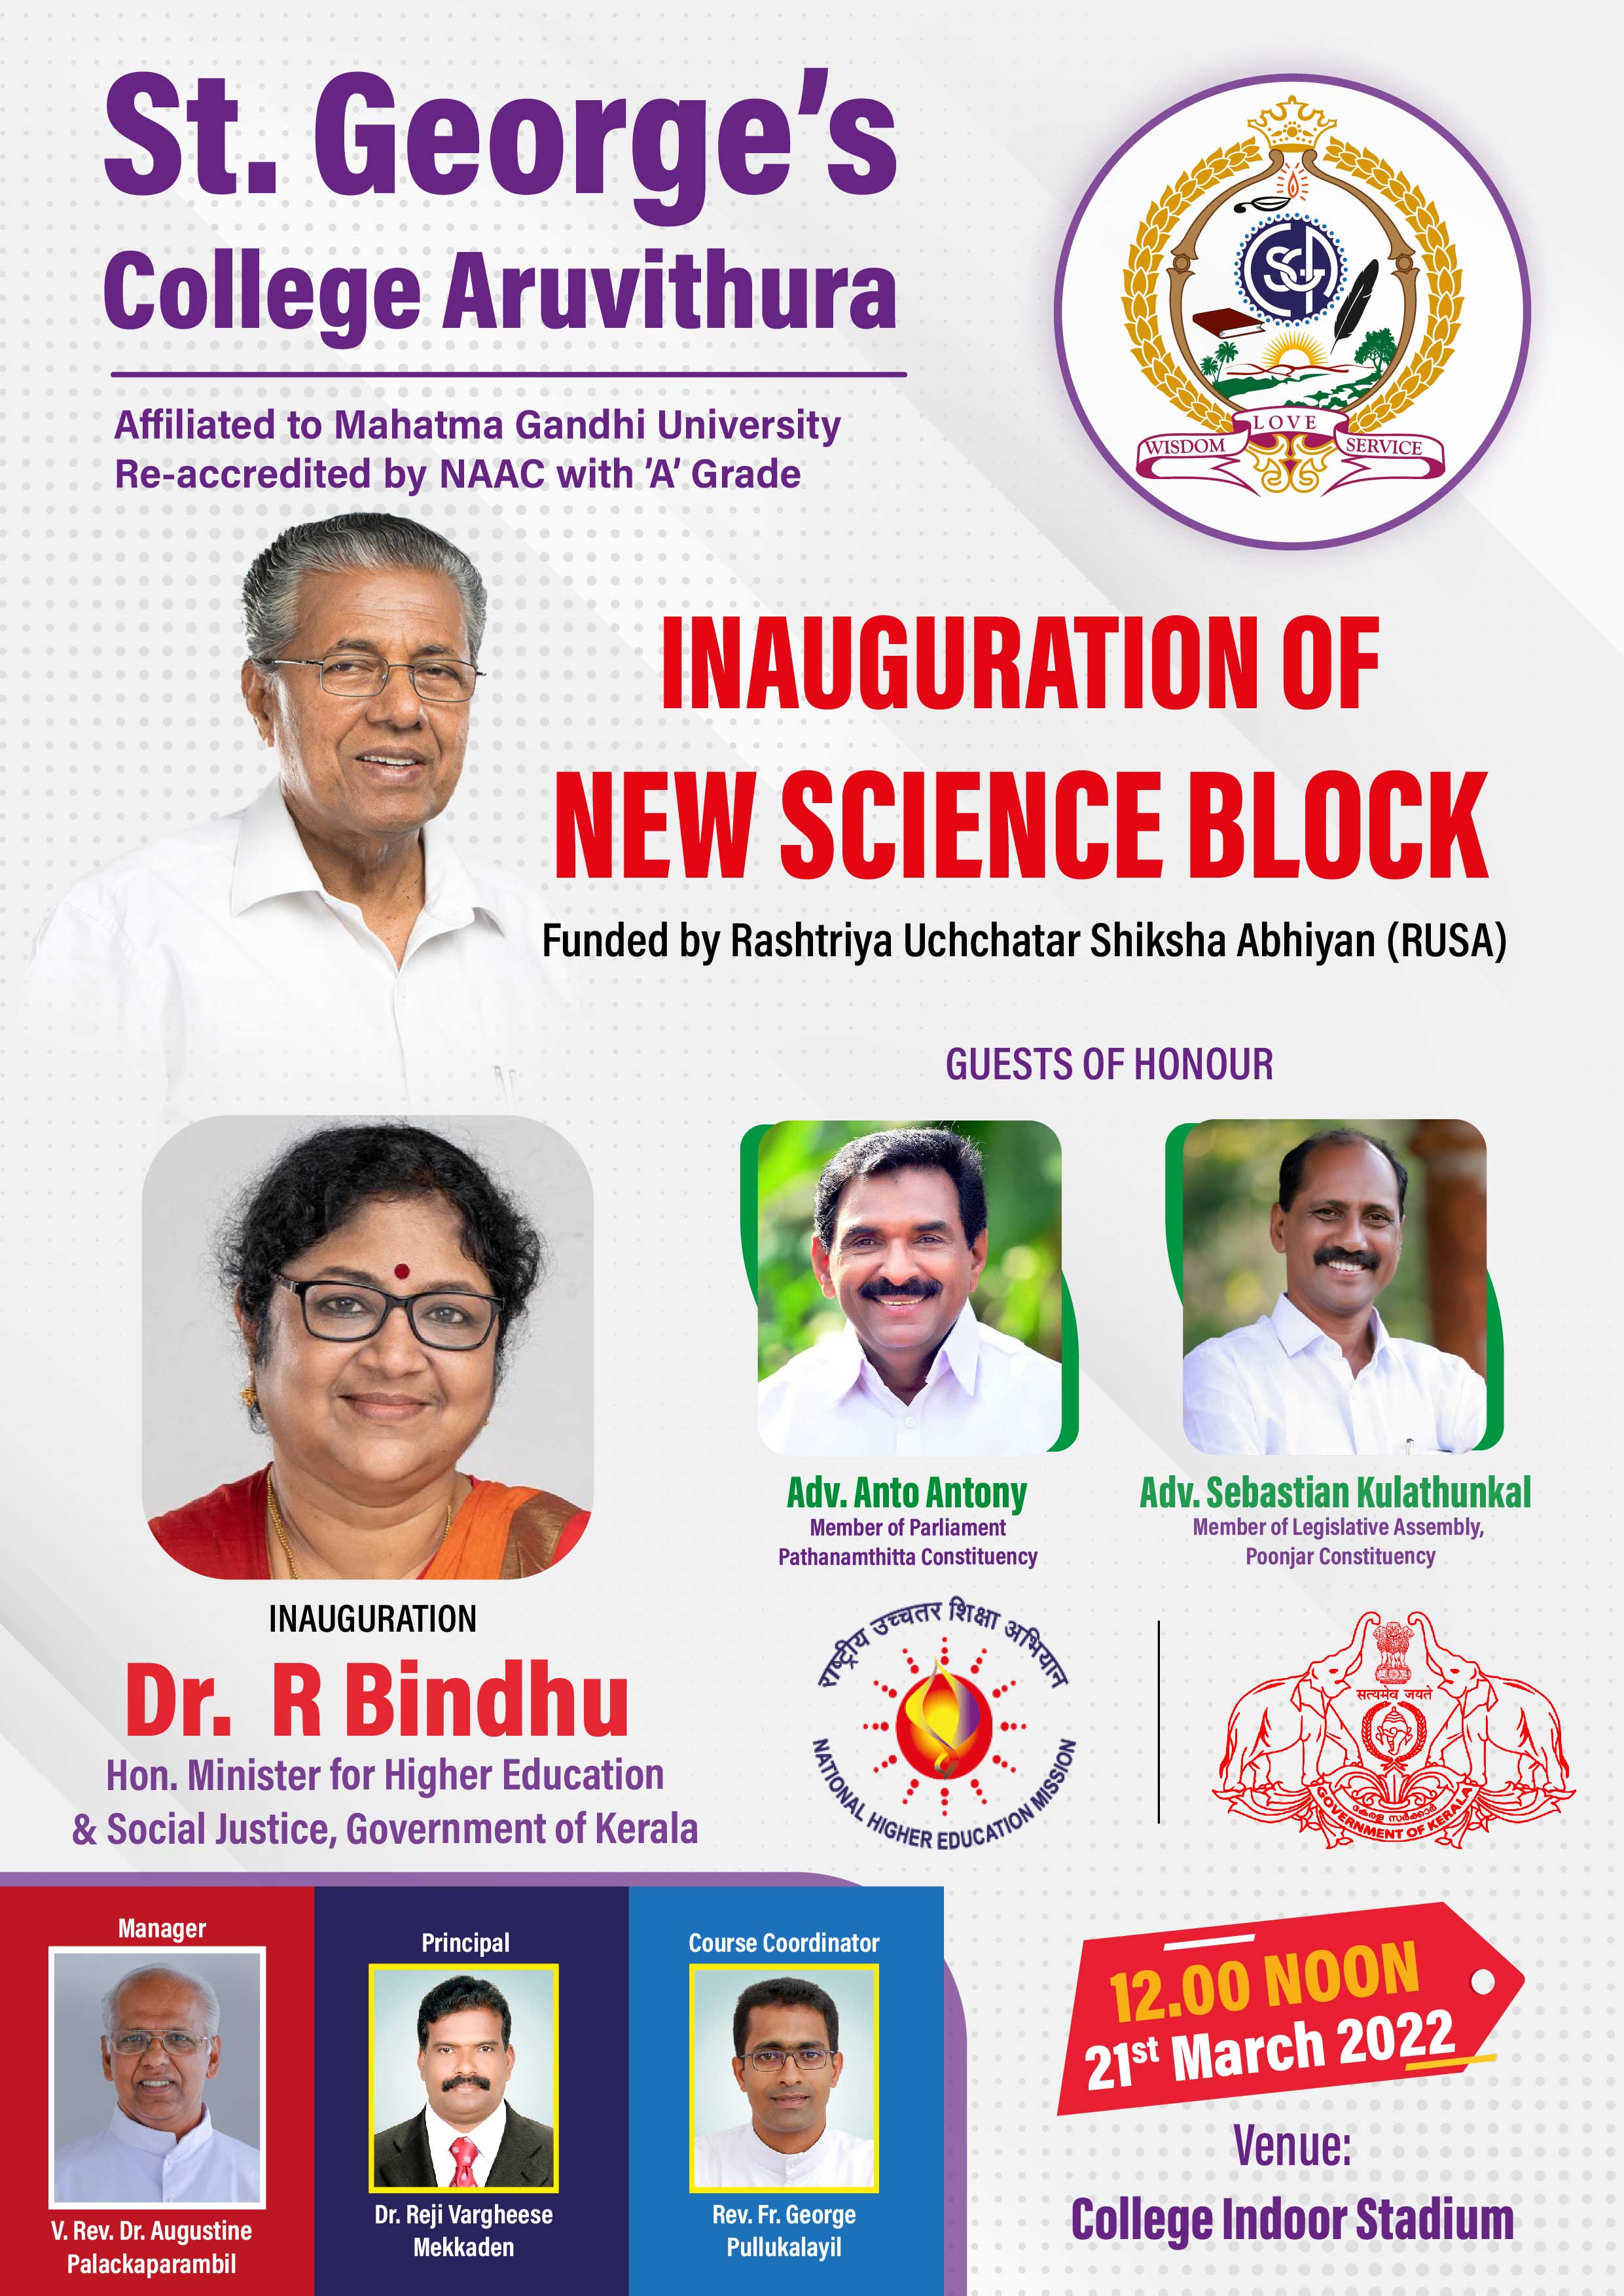 INAUGURATION OF NEW SCIENCE BLOCK